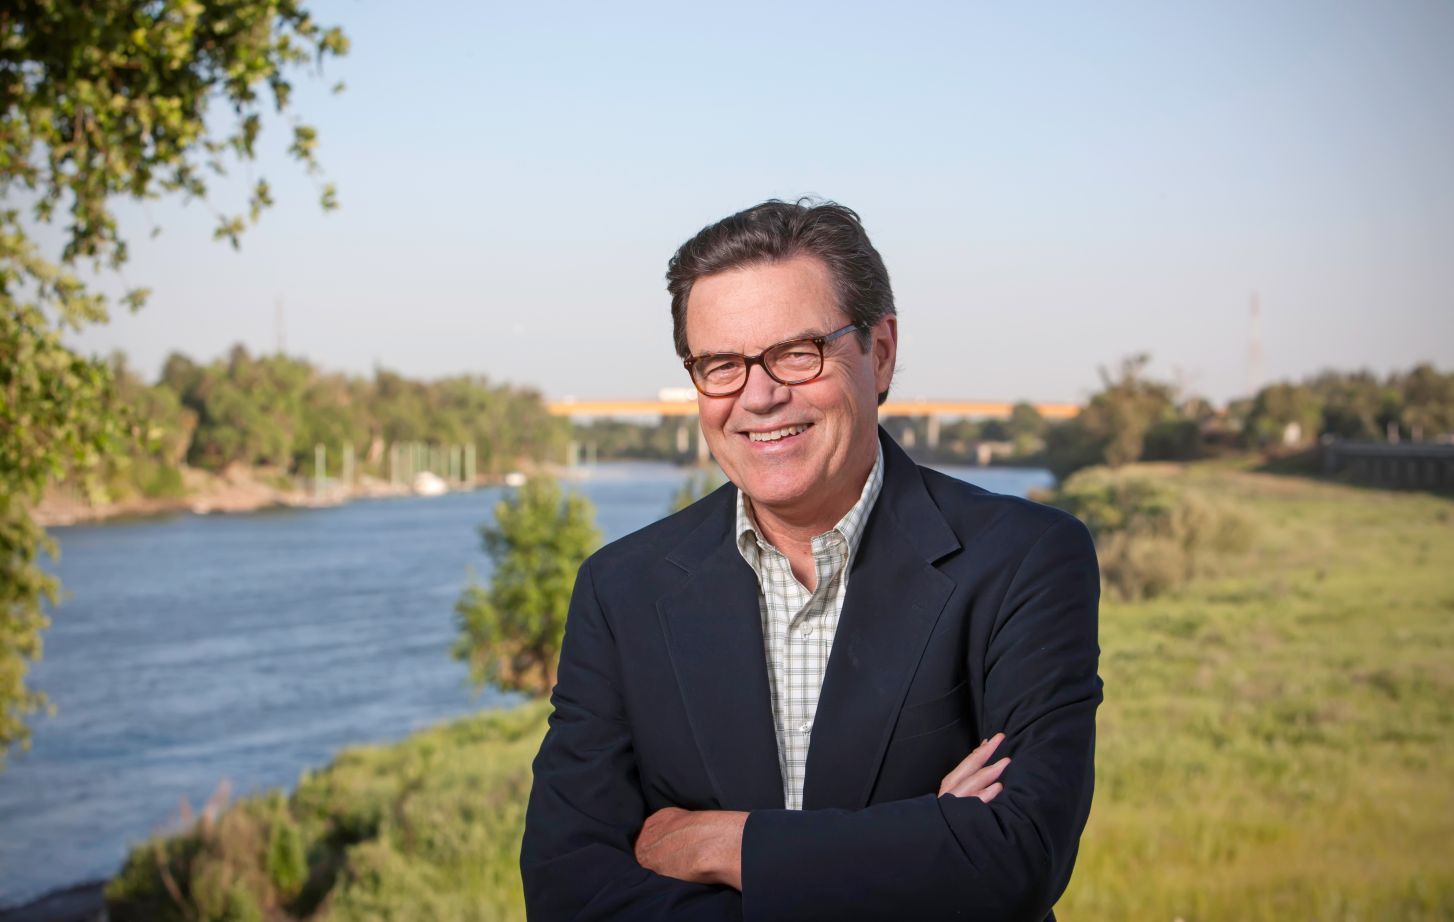 A man in a suit stands smiling in front of a river.